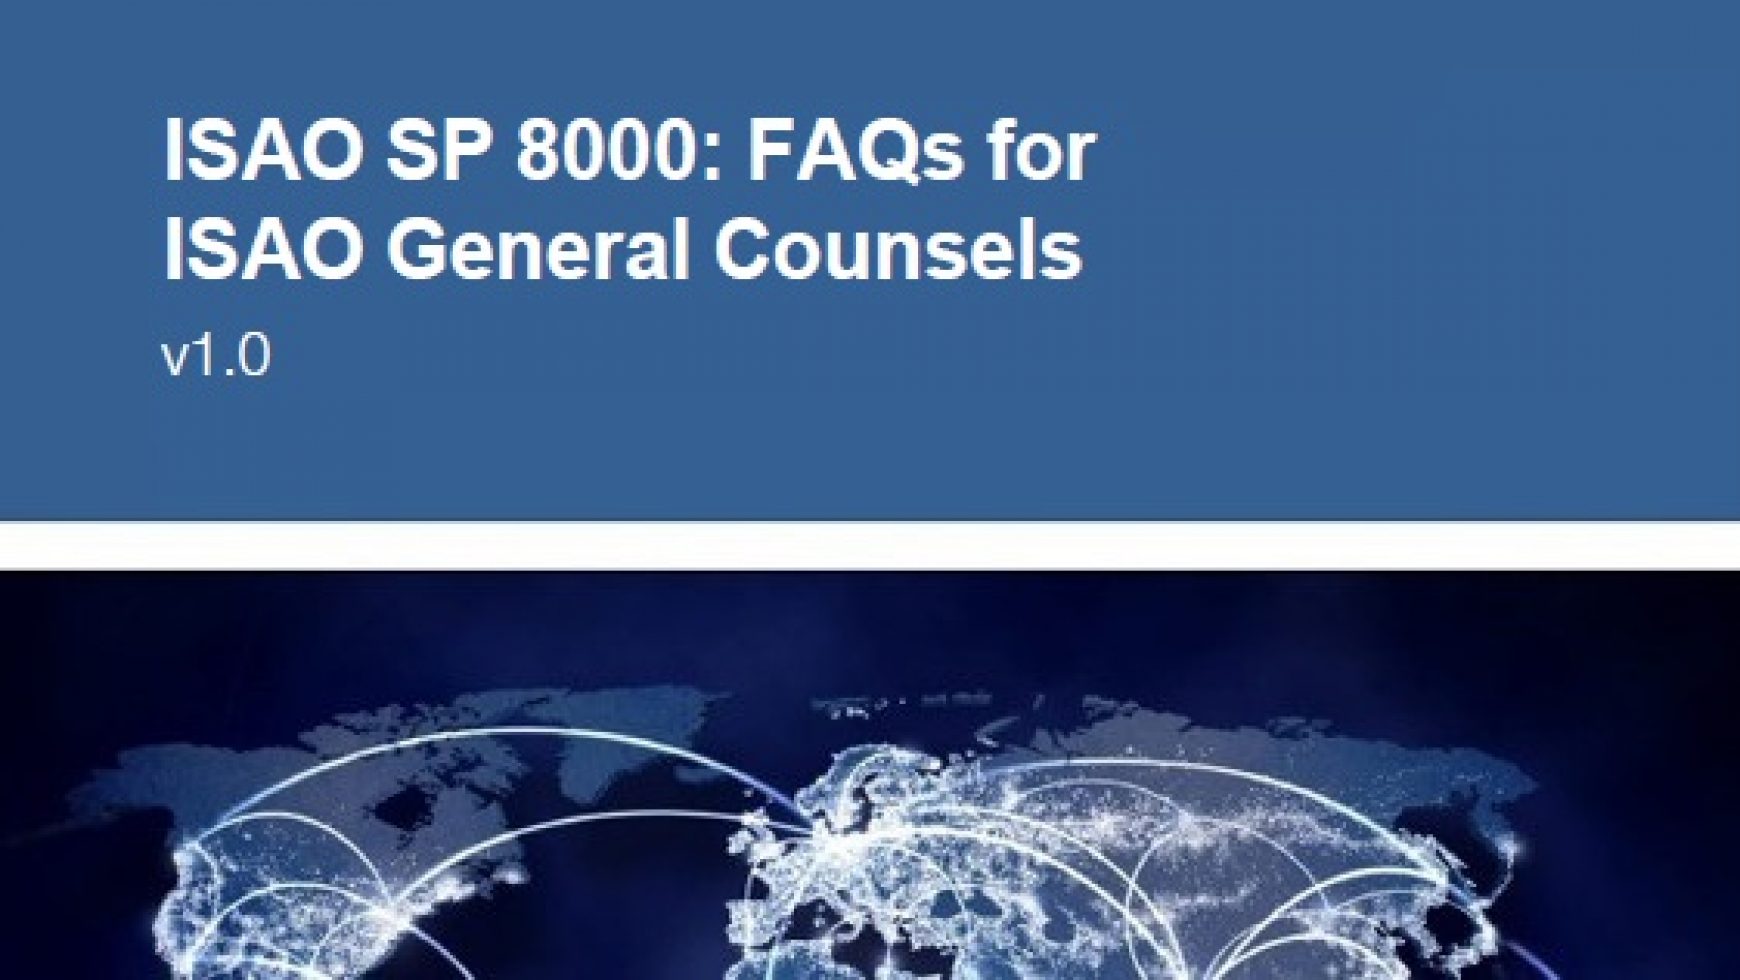 Answering Companies’ Legal Questions Concerning Cybersecurity Information Sharing: A Guide For General Counsels and Corporate Advisors